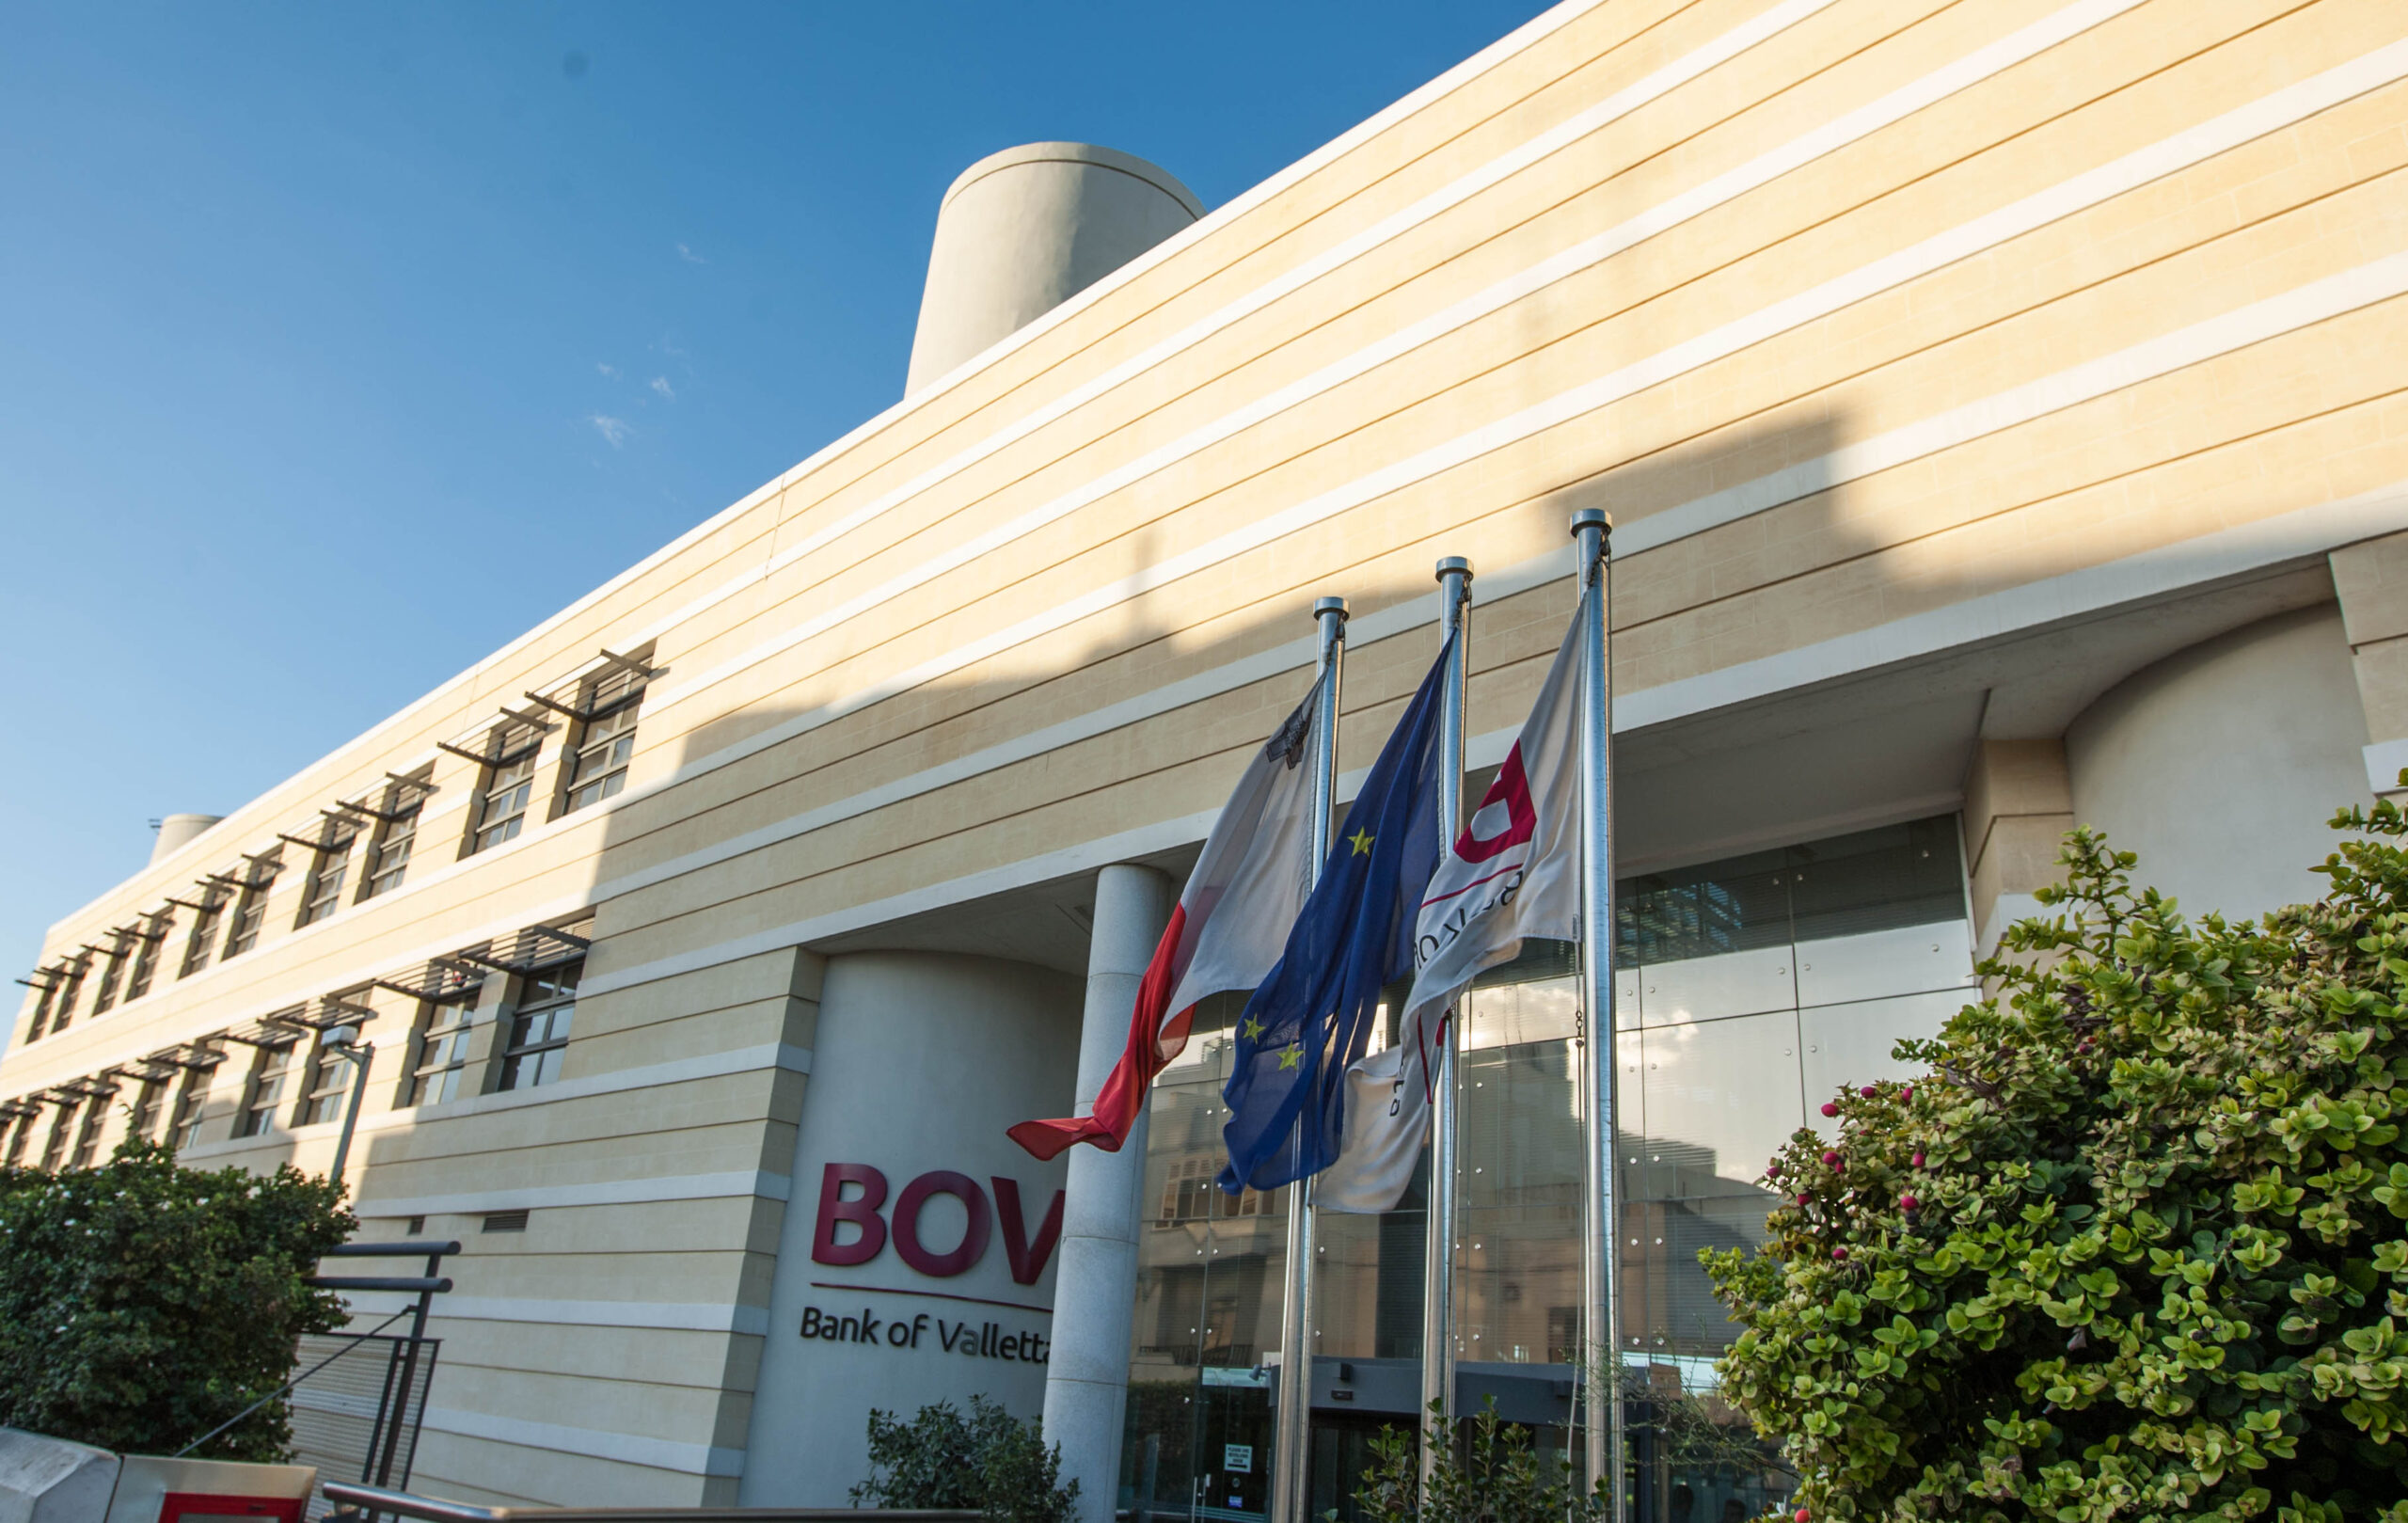 BOV’s intention to sell a part of its non-performing loans